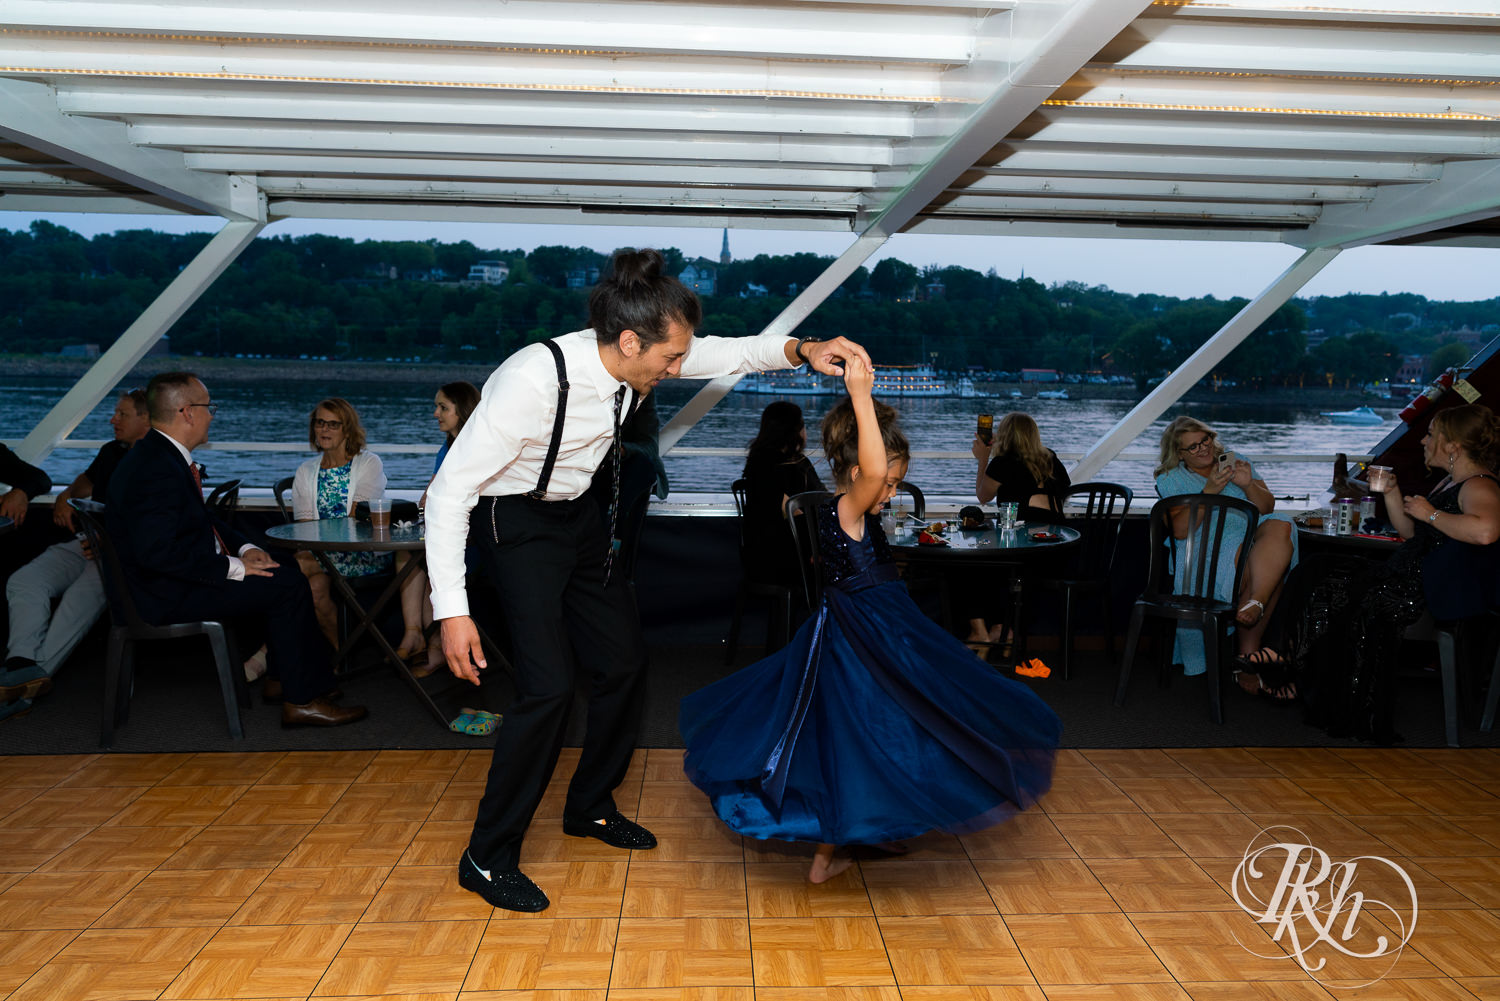 Grooms and guests dance during wedding reception on the Majestic Star by Stillwater River Boats in Stillwater, Minnesota.